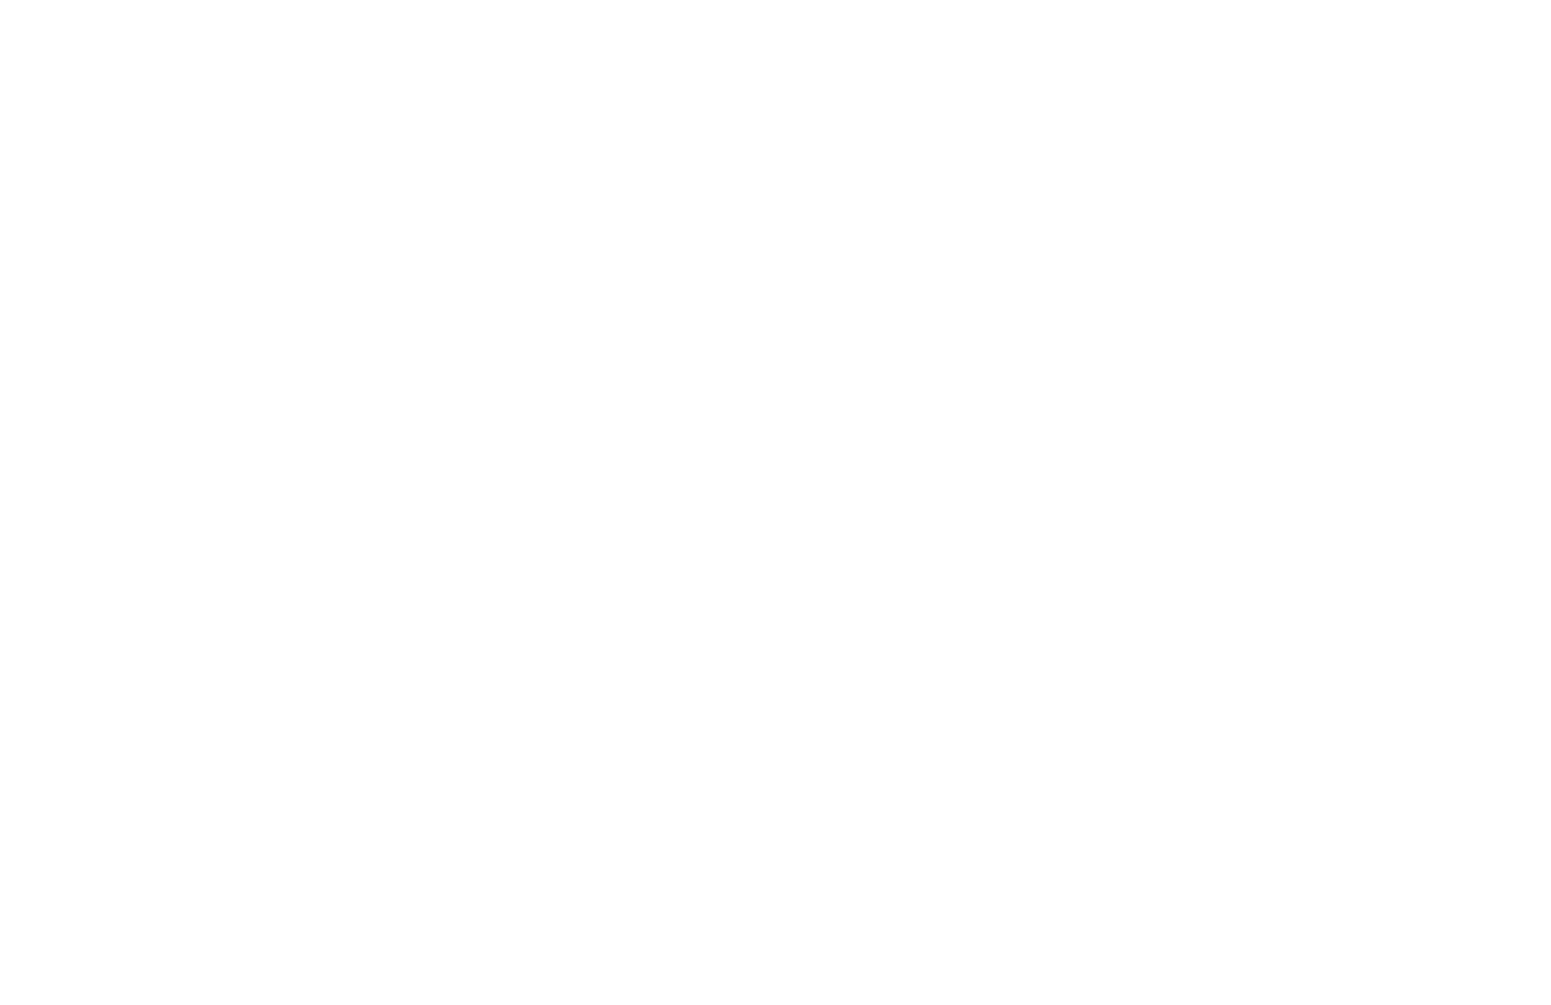 Thob Al Aseel Company logo for dark backgrounds (transparent PNG)